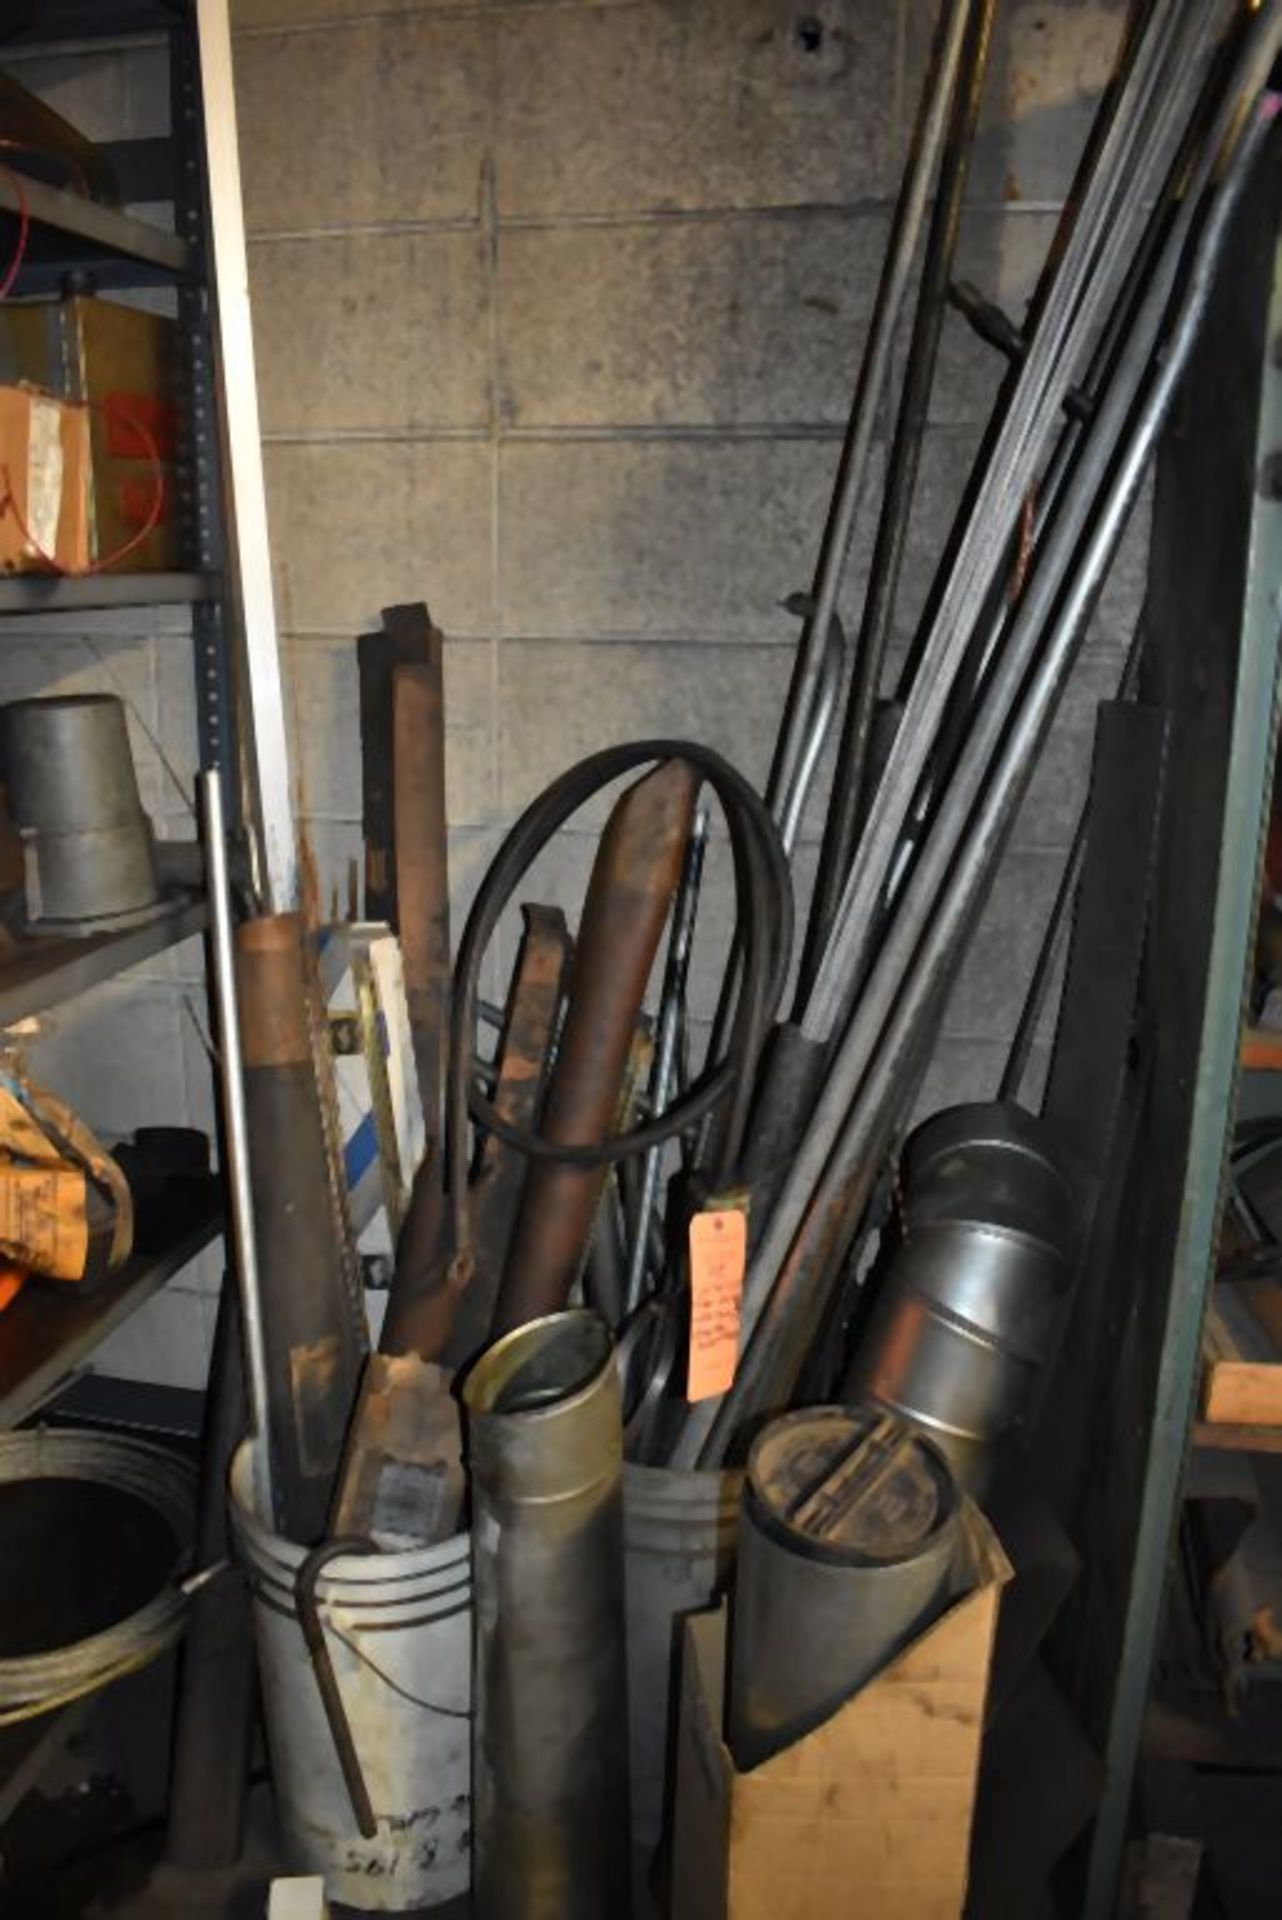 CONTENTS ON FLOOR INCLUDES GALVANIZED STOVE PIPE, STEEL ROD AND BUCKET WITH CONTENTS